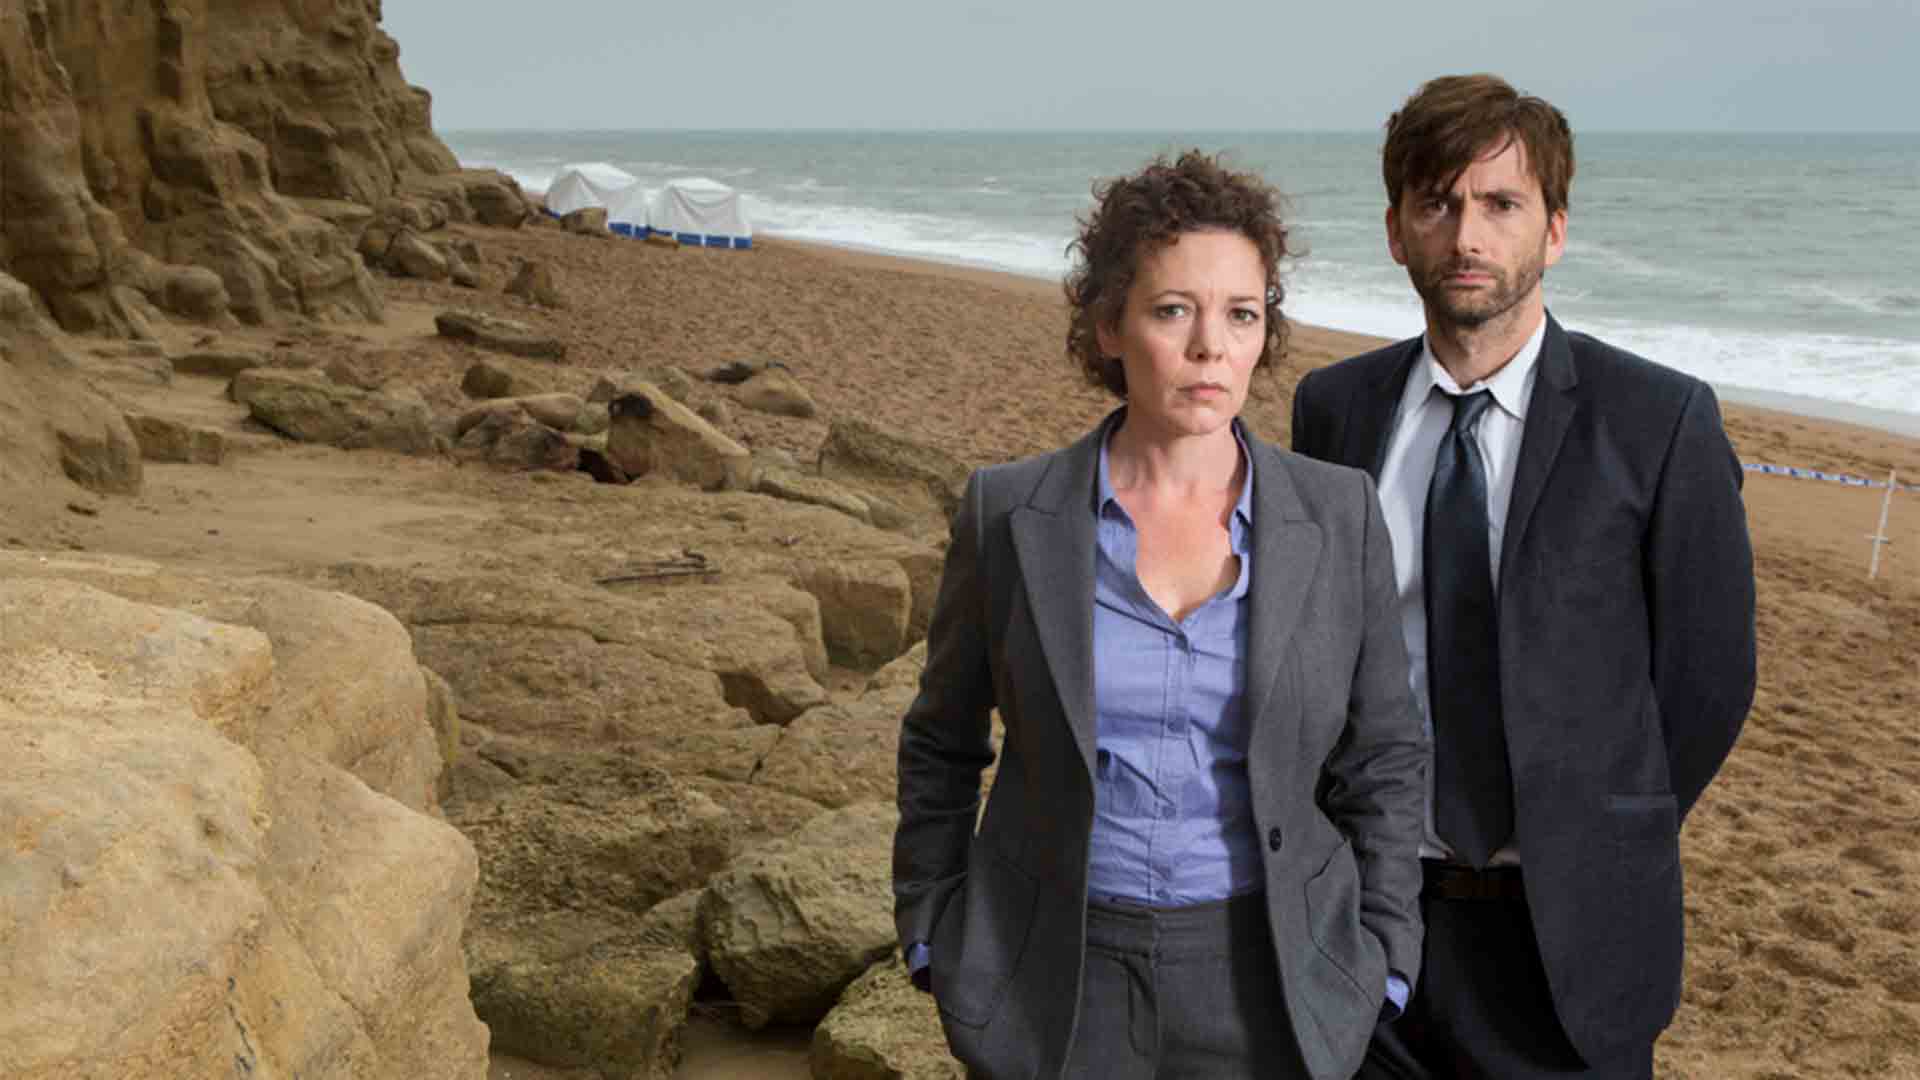 DS Ellie Miller and DI Alec Hardy - BROADCHURCH "Episode One"